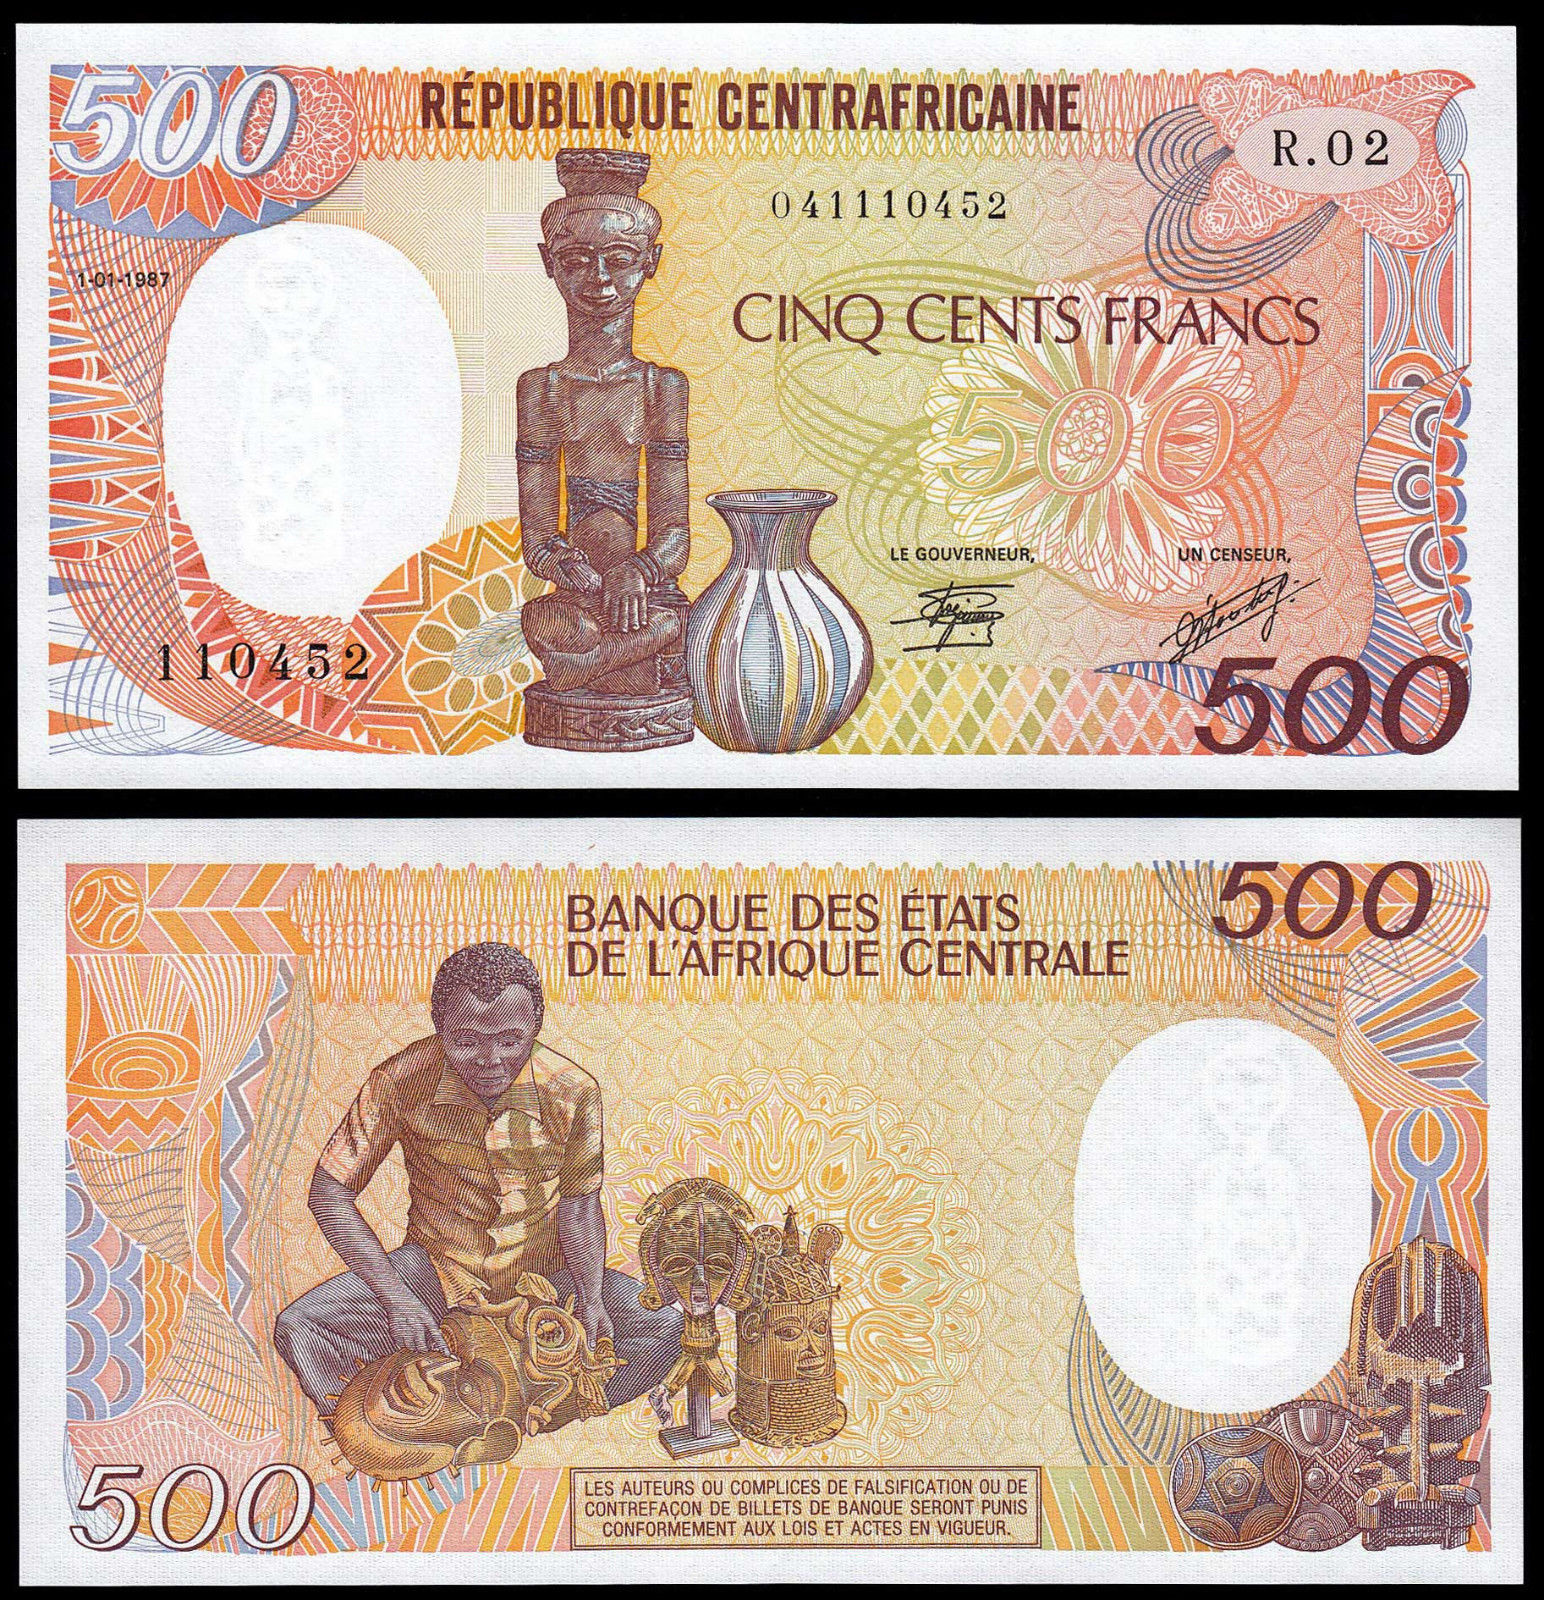 500 francs Central African Repblic 1987